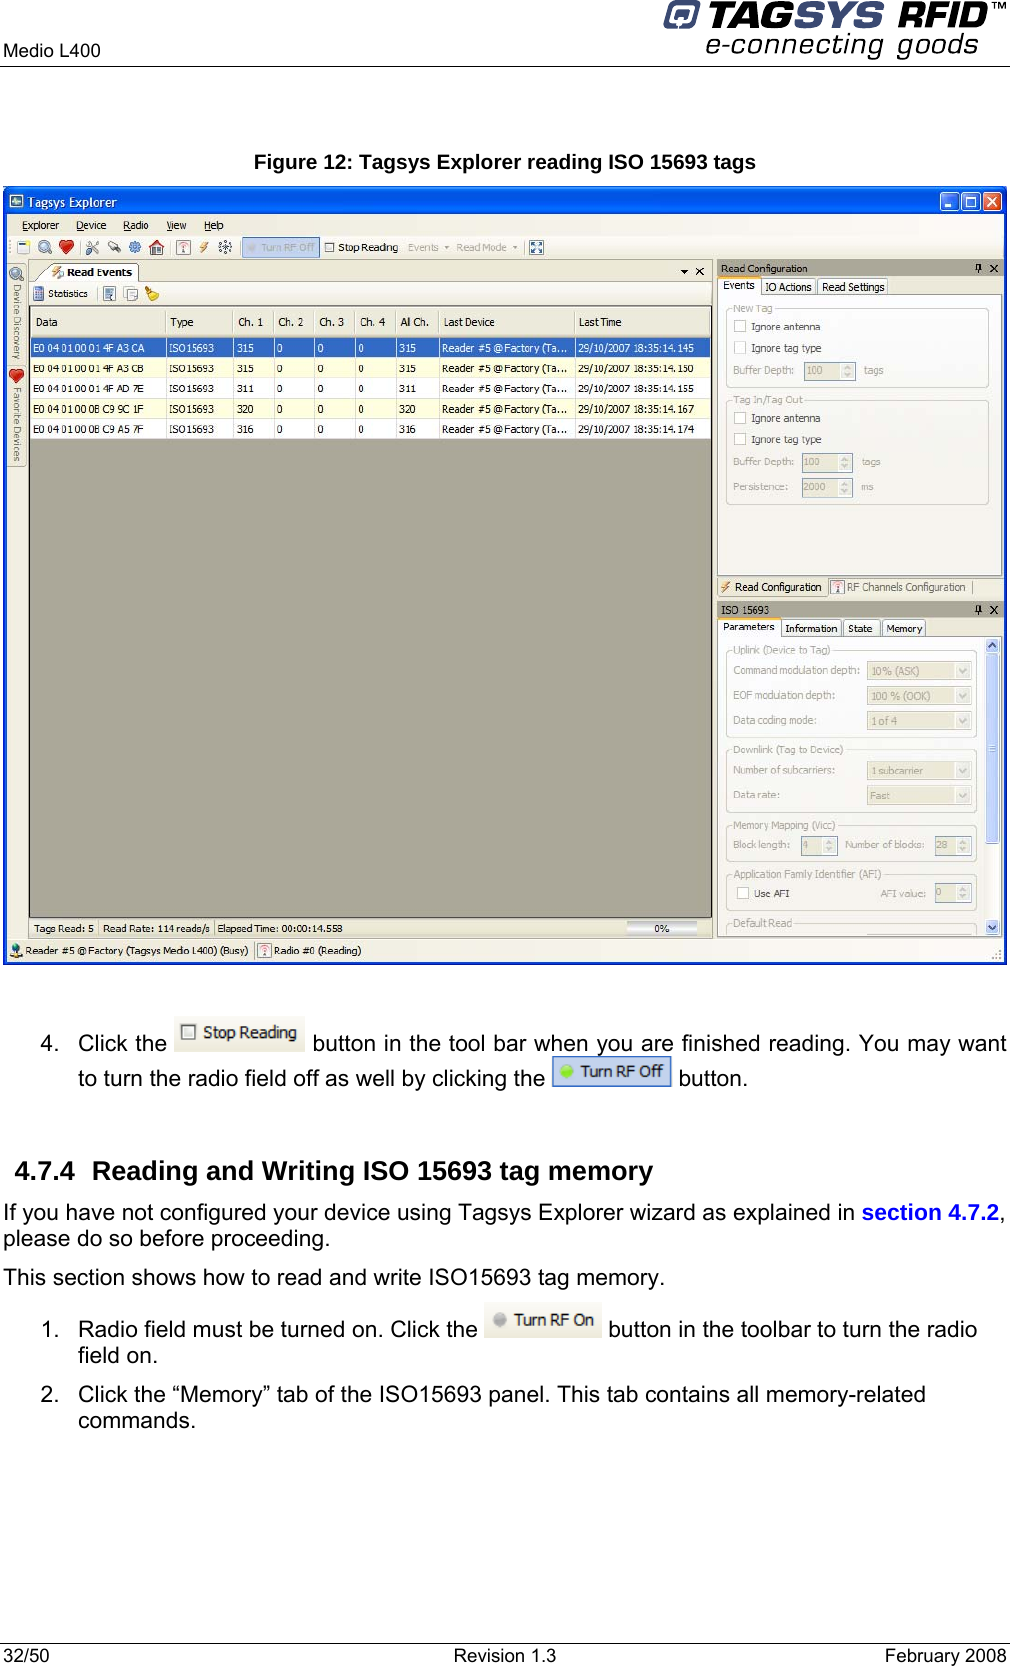  Medio L400     32/50  Revision 1.3  February 2008   Figure 12: Tagsys Explorer reading ISO 15693 tags   4. Click the   button in the tool bar when you are finished reading. You may want to turn the radio field off as well by clicking the   button.  4.7.4  Reading and Writing ISO 15693 tag memory If you have not configured your device using Tagsys Explorer wizard as explained in section 4.7.2, please do so before proceeding. This section shows how to read and write ISO15693 tag memory. 1.  Radio field must be turned on. Click the   button in the toolbar to turn the radio field on. 2.  Click the “Memory” tab of the ISO15693 panel. This tab contains all memory-related commands. 